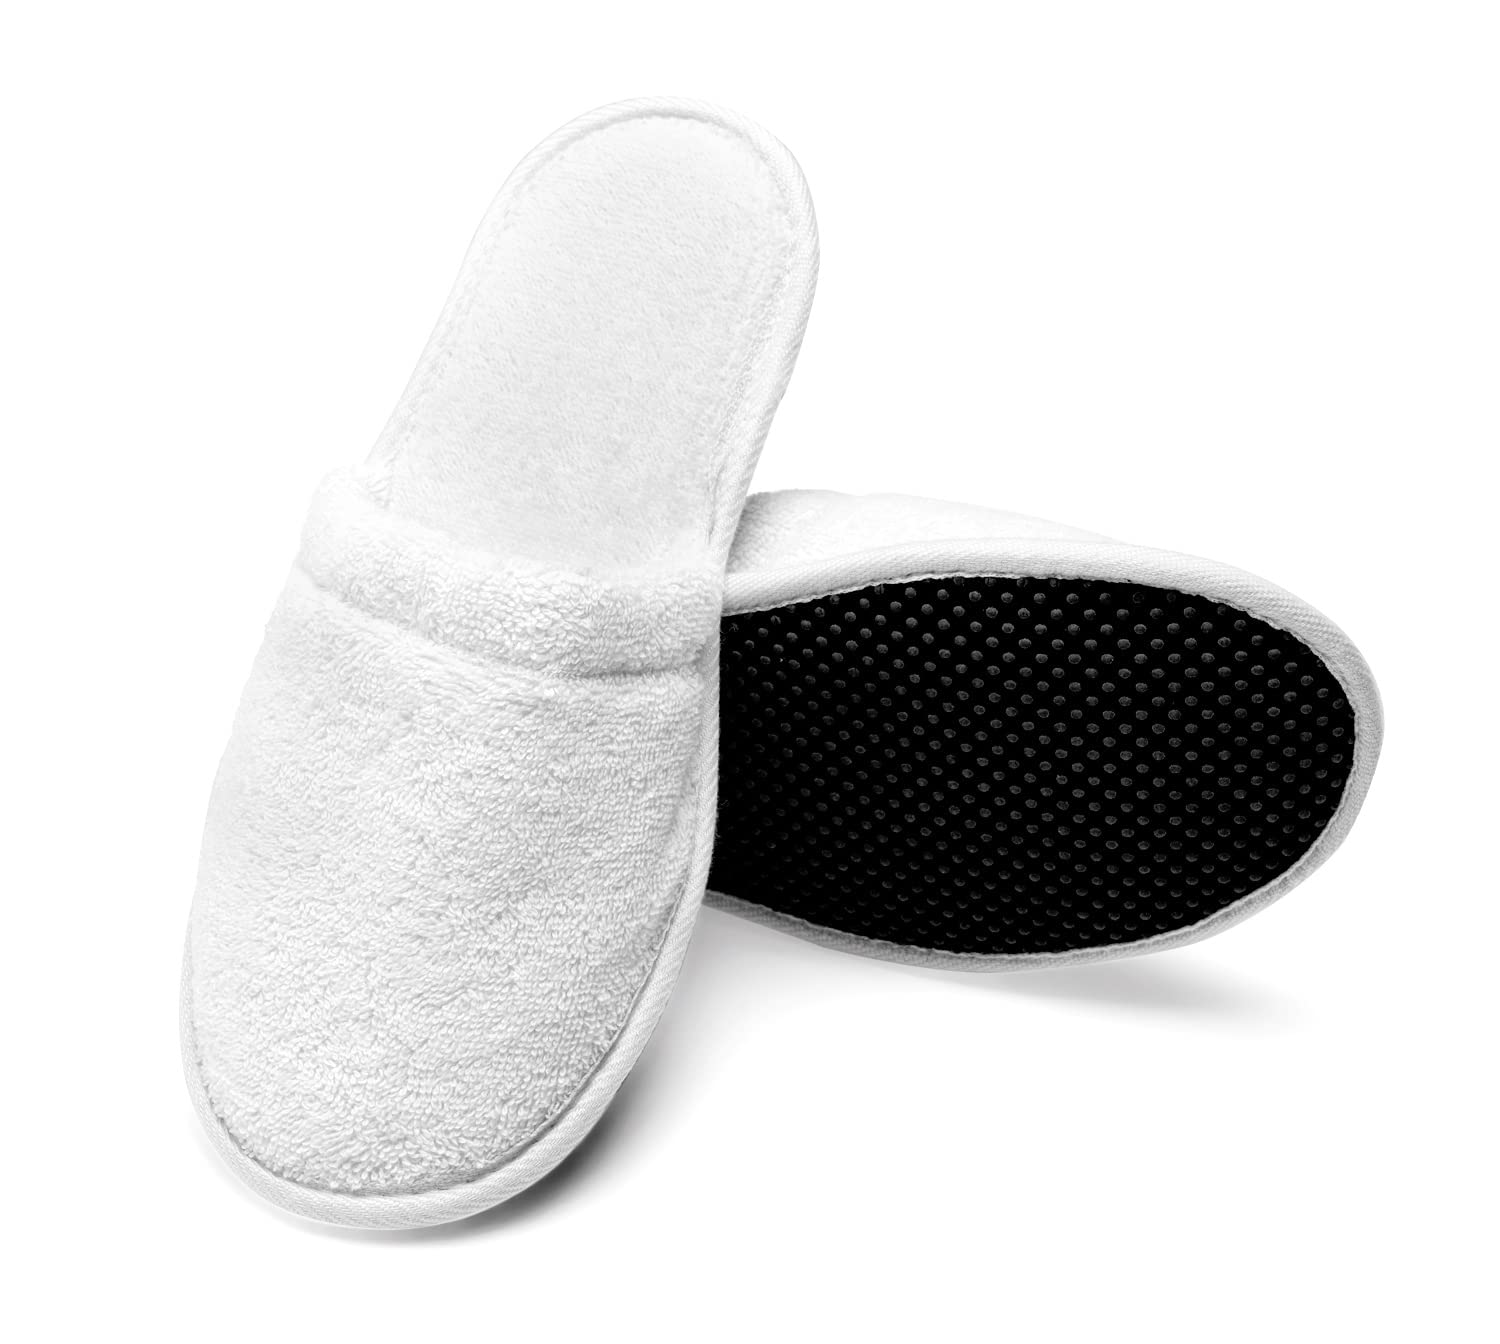 Arus Men's Cotton Slippers Turkish Terry Cloth for Spa and Bath